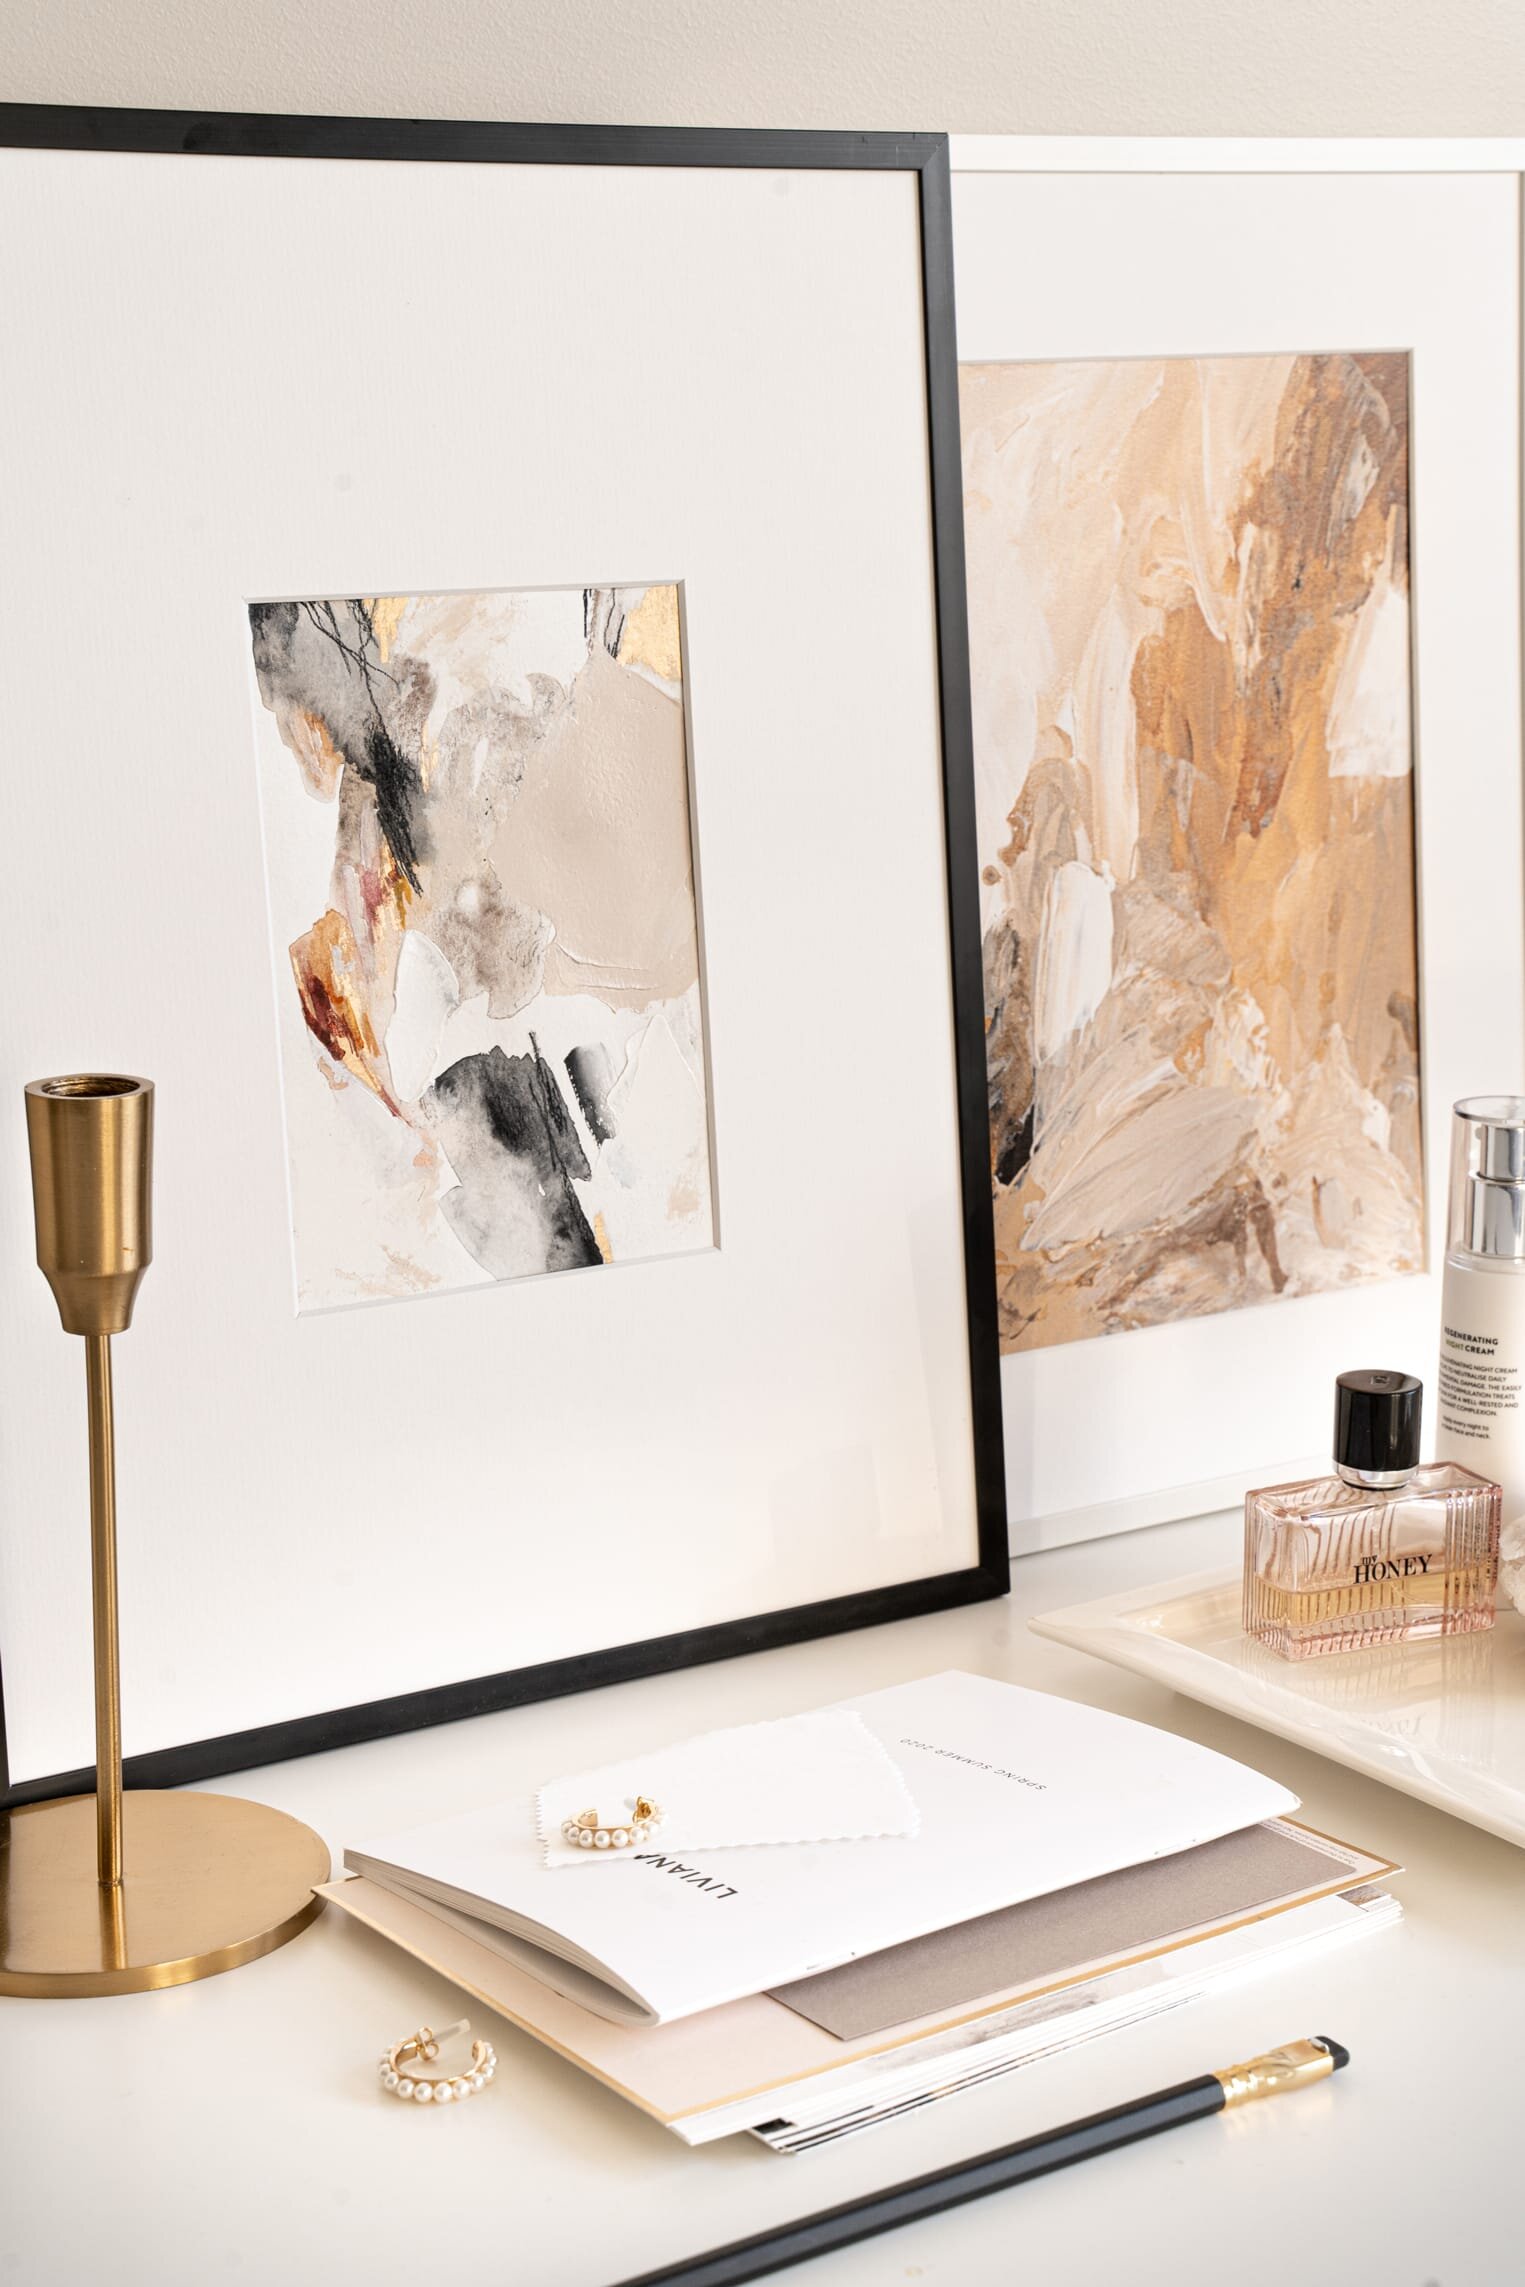 stylish-abstract-neutral-art-painting-by-eclosque-on-working-desk-in-elegant-interior13.jpg